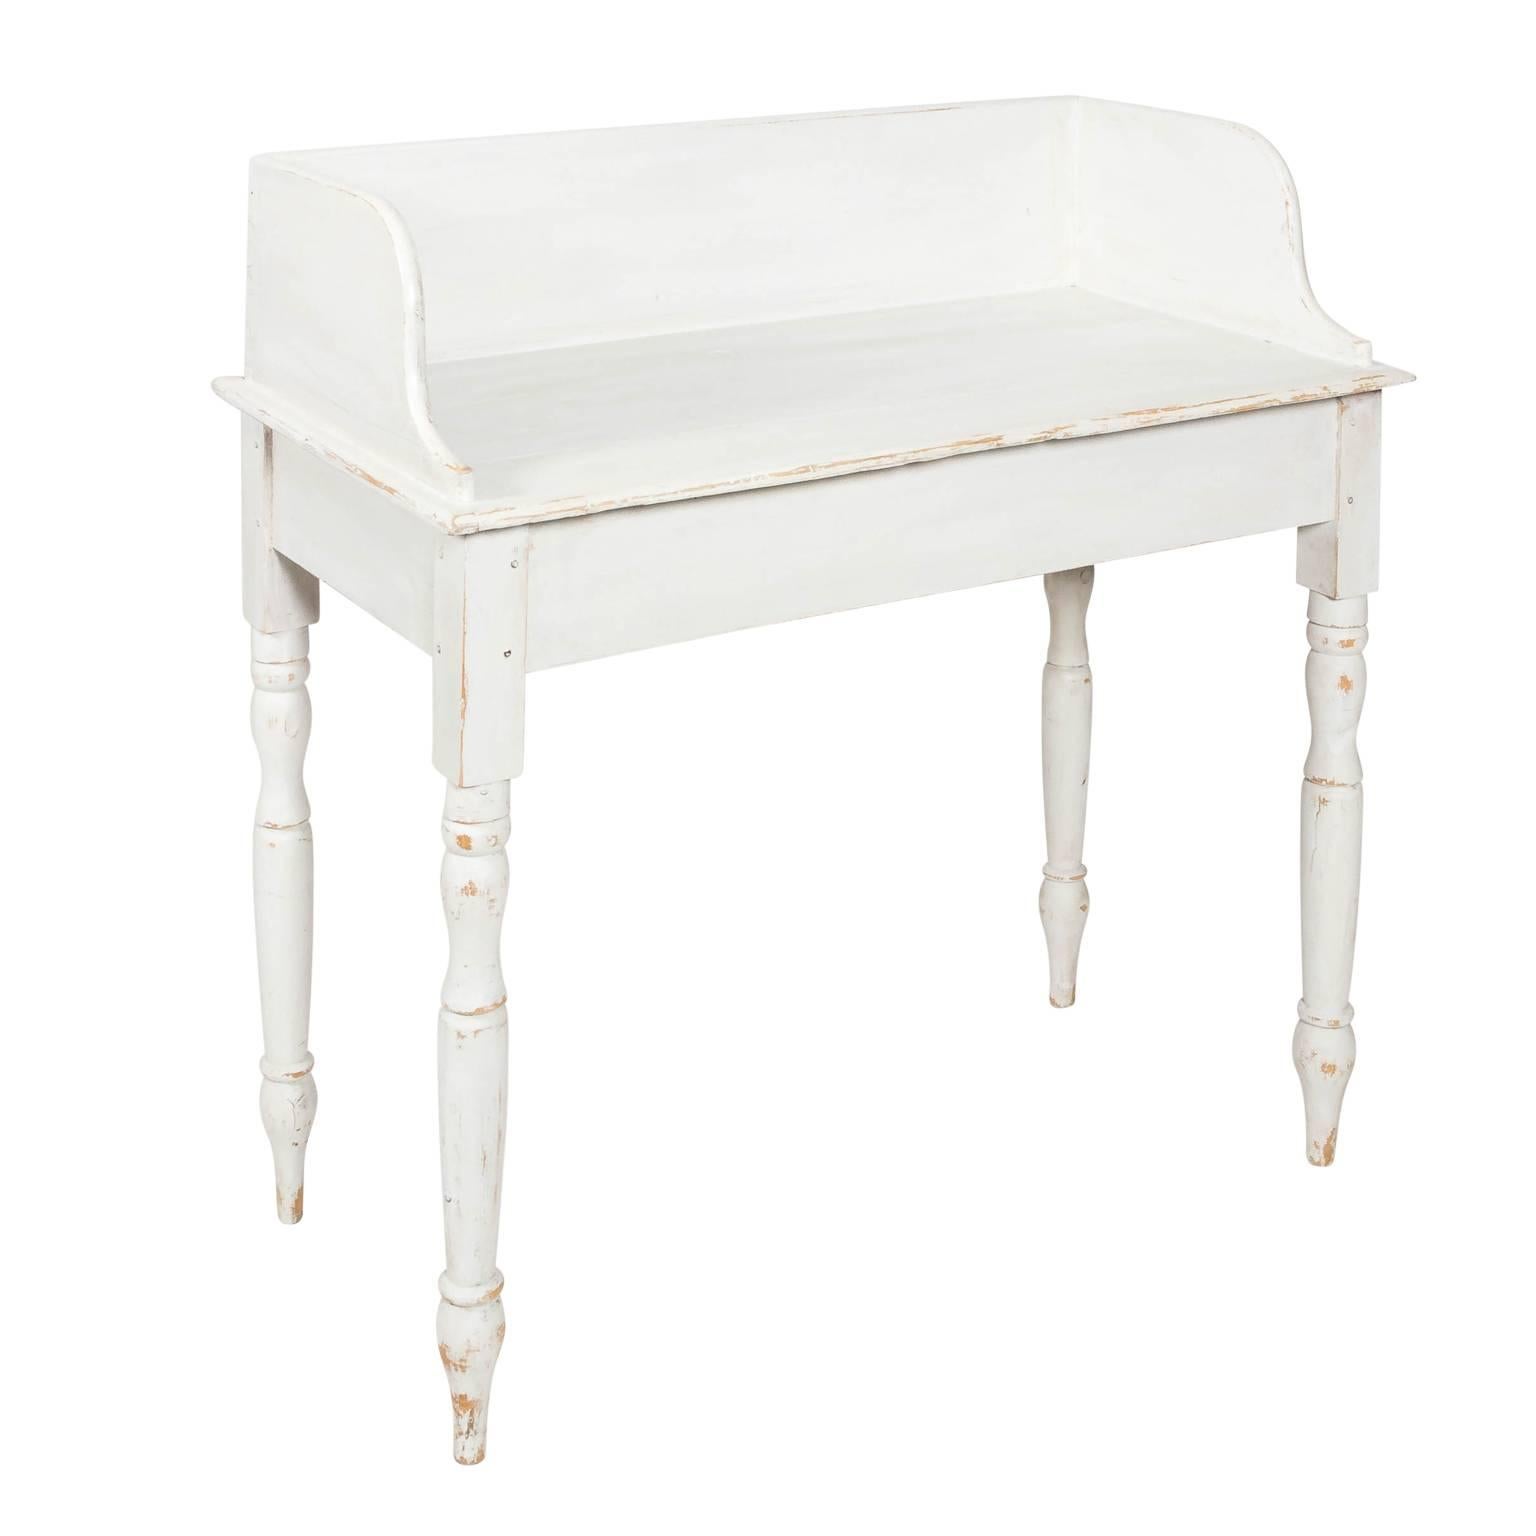 Early 19th Century American White Painted Pinewood Washstand